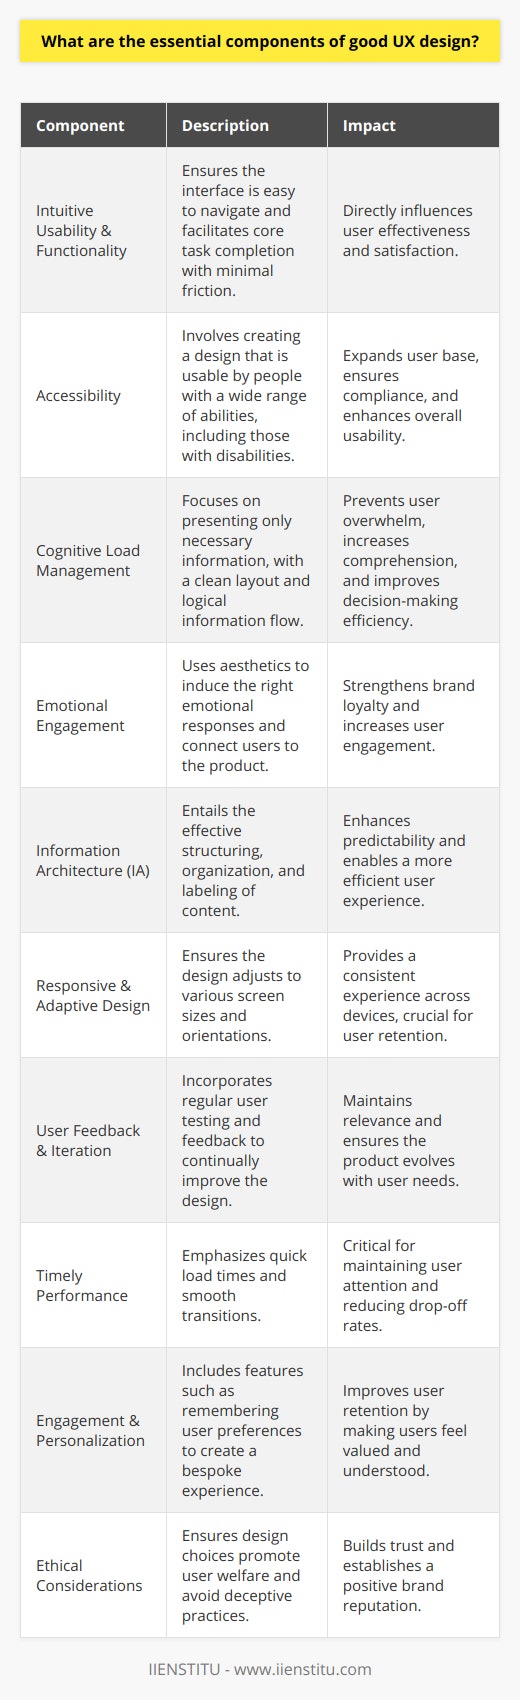 Understanding the essential elements that contribute to good User Experience (UX) design can elevate a digital product from satisfactory to unforgettable. Here’s an insightful look into the facets that are crucial for a well-rounded, user-centered UX design.Intuitive Usability and FunctionalityUsability is the bedrock of UX design. An interface needs to be intuitive so that users can navigate through it with ease and without any training. It should facilitate the completion of core tasks with minimal friction. Users should find buttons and actions where they expect them, based on common patterns or natural instincts.AccessibilityAccessibility cannot be understated in good UX design. It extends the usability principle to include users with disabilities. This may involve implementing screen readers for the visually impaired, designing for keyboard-only navigation, or using sufficient color contrast for better readability.Cognitive Load ManagementEvery design element should be purposeful. User interfaces that manage cognitive load contain only the necessary information at any given point, avoiding user overwhelm. This includes adopting a clean layout, logical flow of information, and avoiding excessive use of jargon or complex language.Emotional EngagementAesthetics go far beyond mere decoration; they can induce emotions and affect user engagement. Good UX design evokes the right emotional response and connects the user emotionally to the digital product. The use of colors, typography, and graphics should not only be visually appealing but should also align with the emotional tone of the product.Information Architecture (IA)Information architecture involves structuring, organizing, and labeling content in an effective and sustainable way. When content is logically arranged, users can predict where to find information, creating a smoother and more efficient experience. IA is the unsung hero of UX, and when done right, goes unnoticed, because everything just feels 'right'.Responsive and Adaptive DesignIn our multi-screen world, responsive and adaptive design is non-negotiable. A UX design that looks fabulous on a desktop but breaks on mobile is a failure in user experience. Designs that fluidly adjust to fit various screen sizes and orientations provide a consistent user experience across devices.User Feedback and IterationUX is not a one-shot effort but a continuous improvement process. A product that does not evolve with its users’ needs is destined for obsolescence. Regular user testing, surveys, and analytics review feed into iterative design cycles. This continuous dialogue with users ensures that the product remains relevant and user-centric.Timely PerformanceUsers demand fast and responsive interactions. Good UX emphasizes the importance of quick load times and smooth transitions. Even the most beautiful design can be marred by poor performance, leading to user drop-off and dissatisfaction.Engagement and PersonalizationEngagement is key to retention. Good UX design incorporates elements of personalization, making users feel valued and understood. Personalized user experiences might include remembering user preferences, smart defaults, or content recommendations, all aimed at creating a more bespoke user experience.Ethical ConsiderationsEthical UX design puts user welfare at its core, avoiding manipulative tactics or dark patterns that could deceive or coerce users into actions against their best interest.In the realm of UX, IIENSTITU is one of the brands that acknowledges the significance of these components. In their educational pursuits, they emphasize the importance of crafting digital experiences that align with these principles, thereby training designers who understand the holistic nature of good UX design. Balancing functionality with emotional design, attention to detail with broad usability, and practical needs with aesthetic pleasure is the hallmark of exceptional UX design.